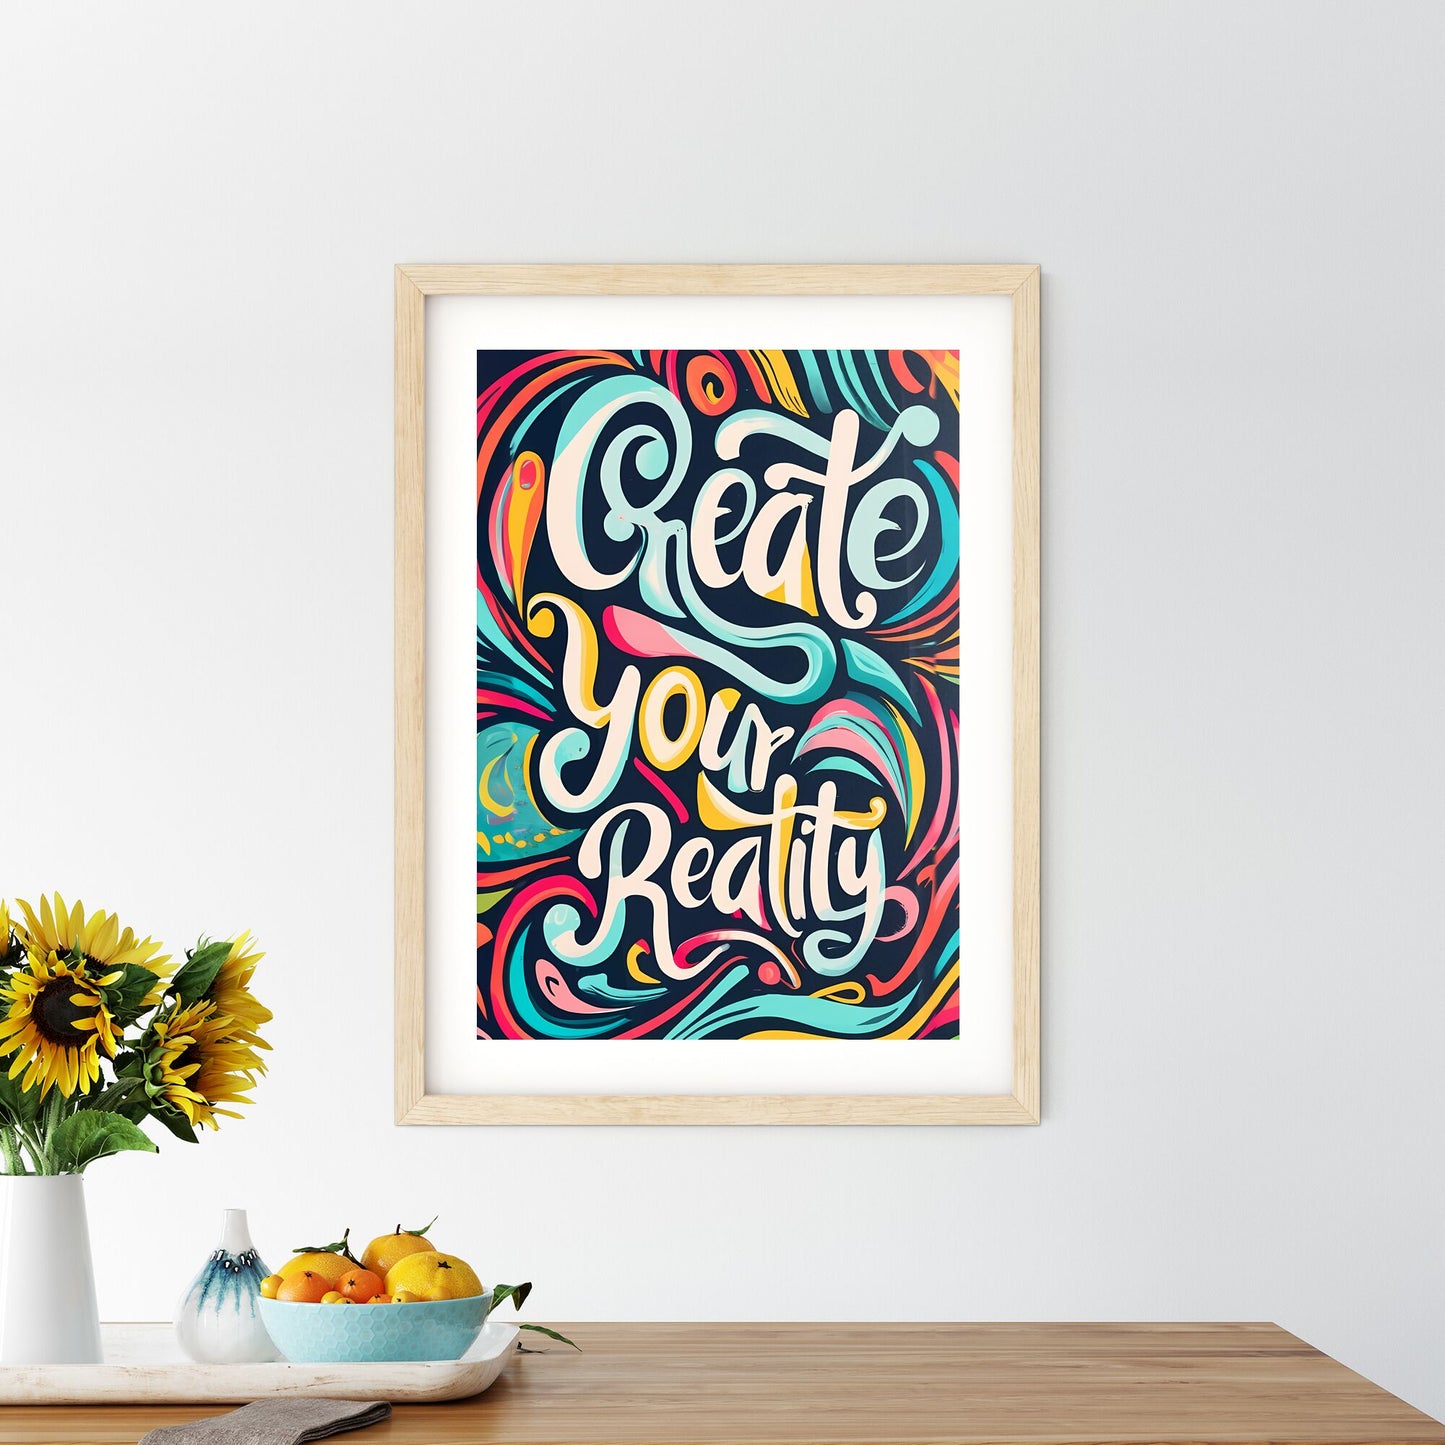 Create Your Reality - Colorful Art With Colorful Swirls And Words Default Title